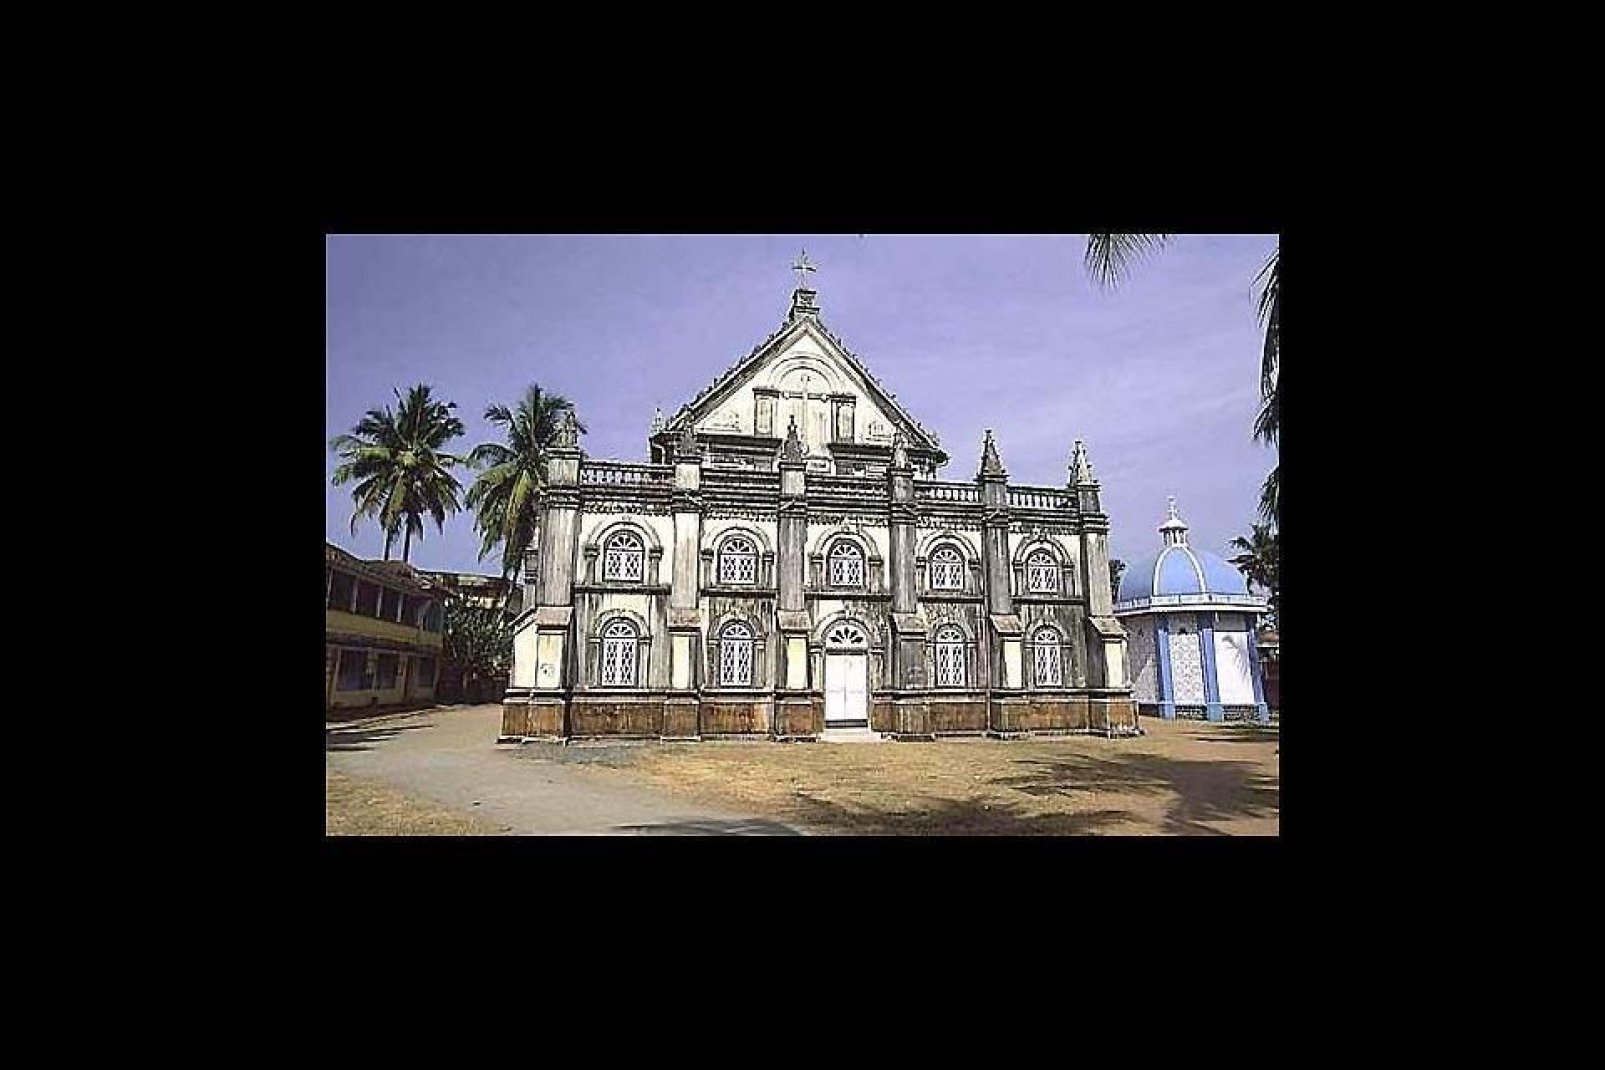 This baroque-style basilica dates back to 1887. It was destroyed by the English in 1785.